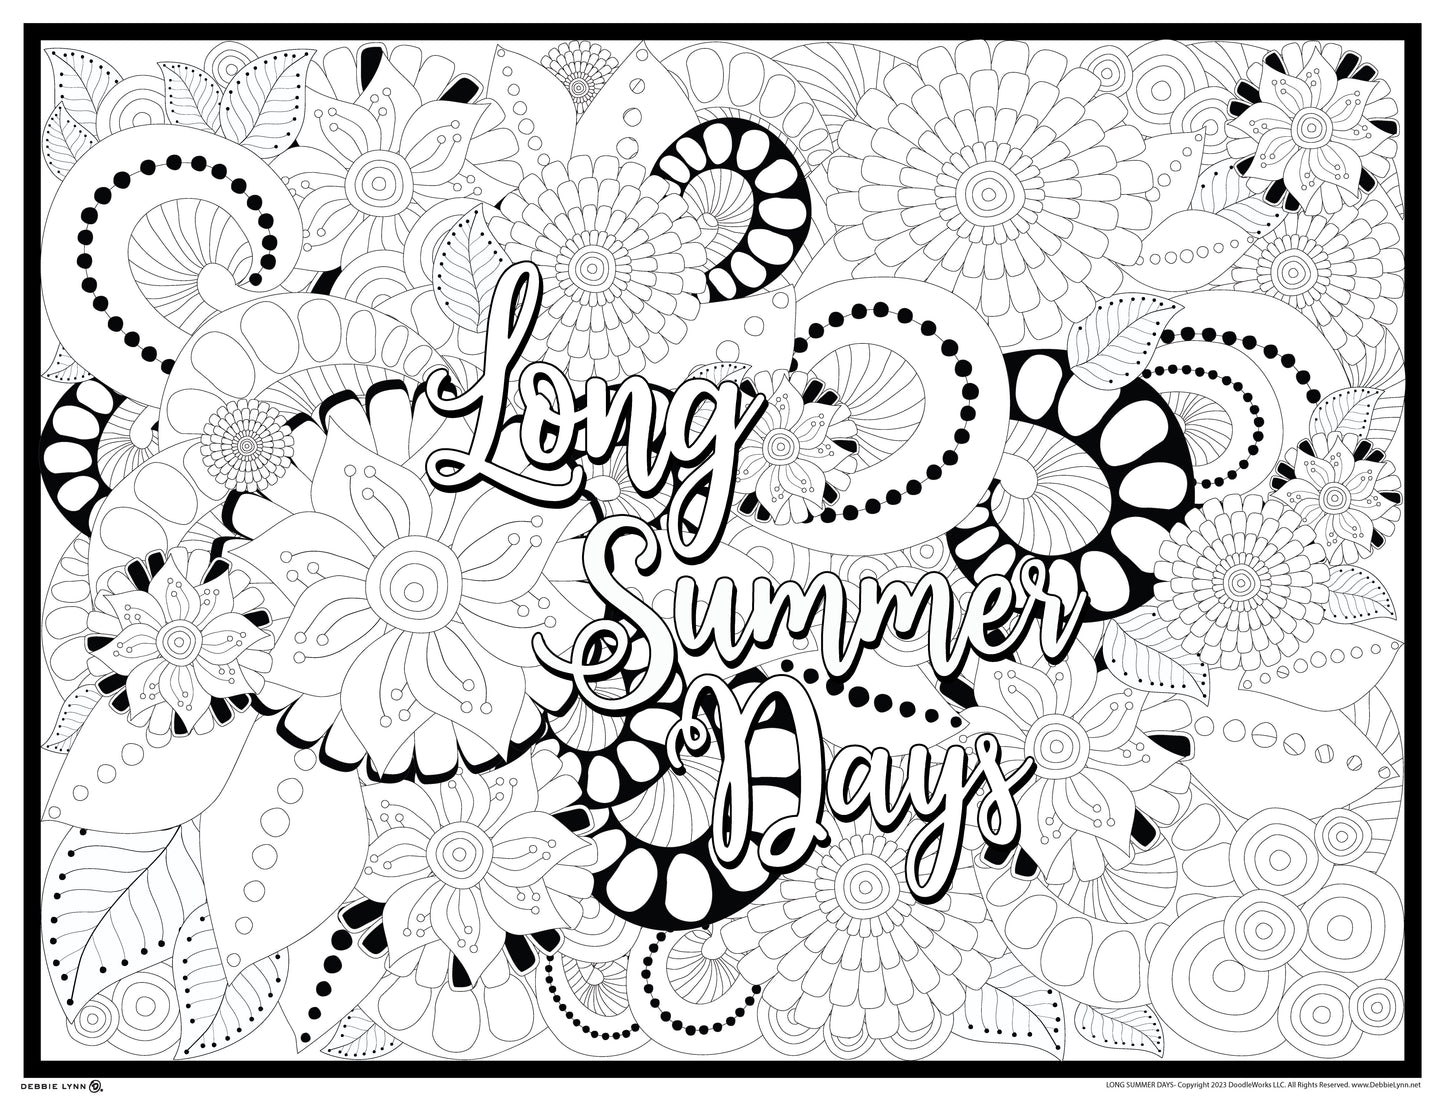 Long Summer Days Personalized Giant Coloring Poster 46"x60"